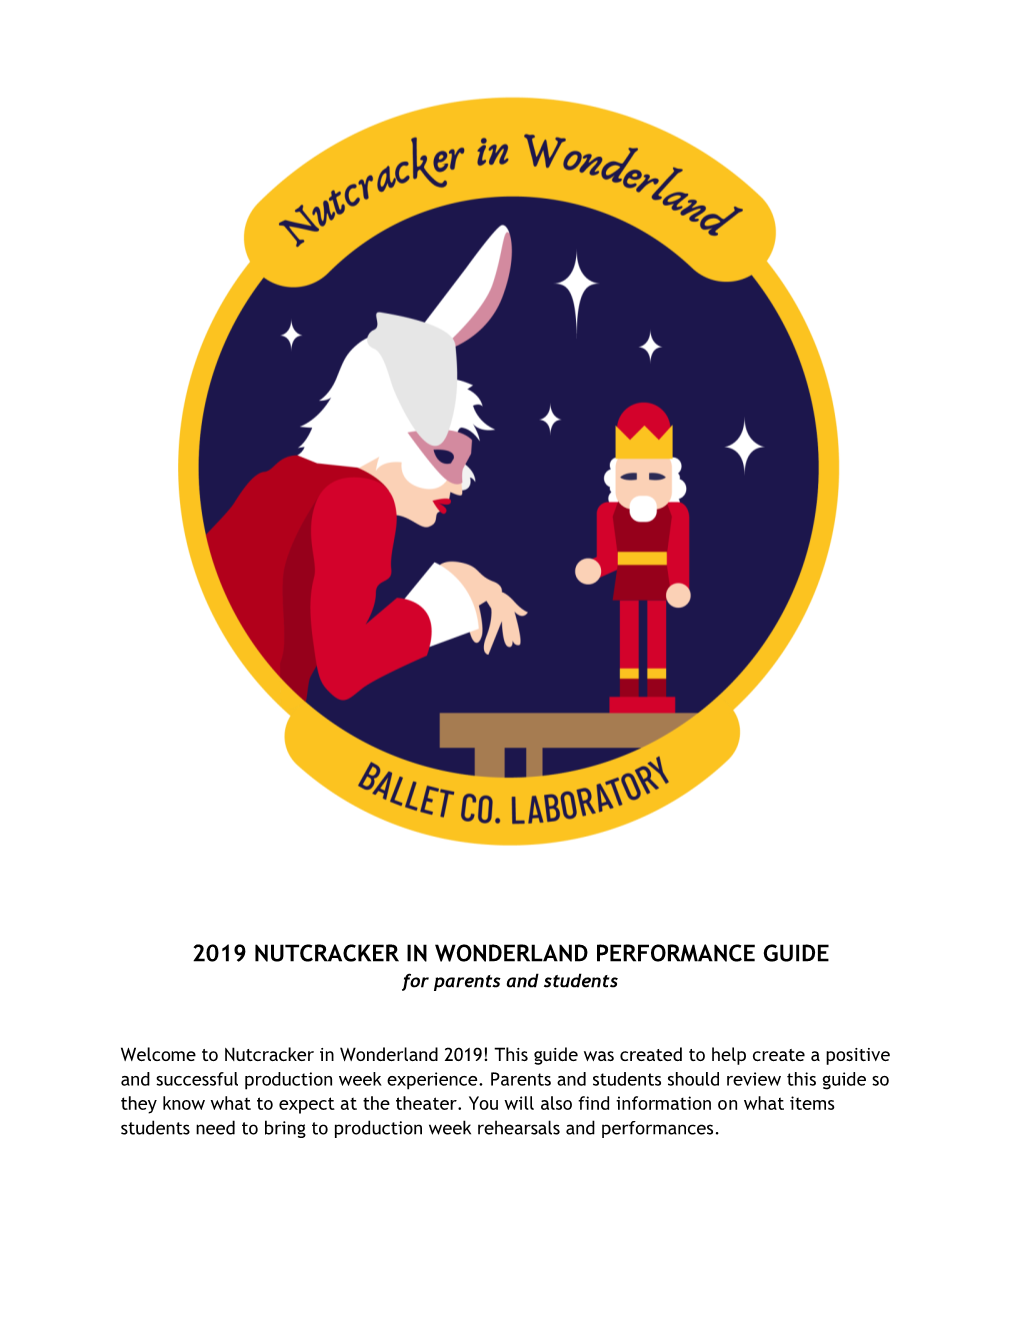 2019 NUTCRACKER in WONDERLAND PERFORMANCE GUIDE for Parents and Students